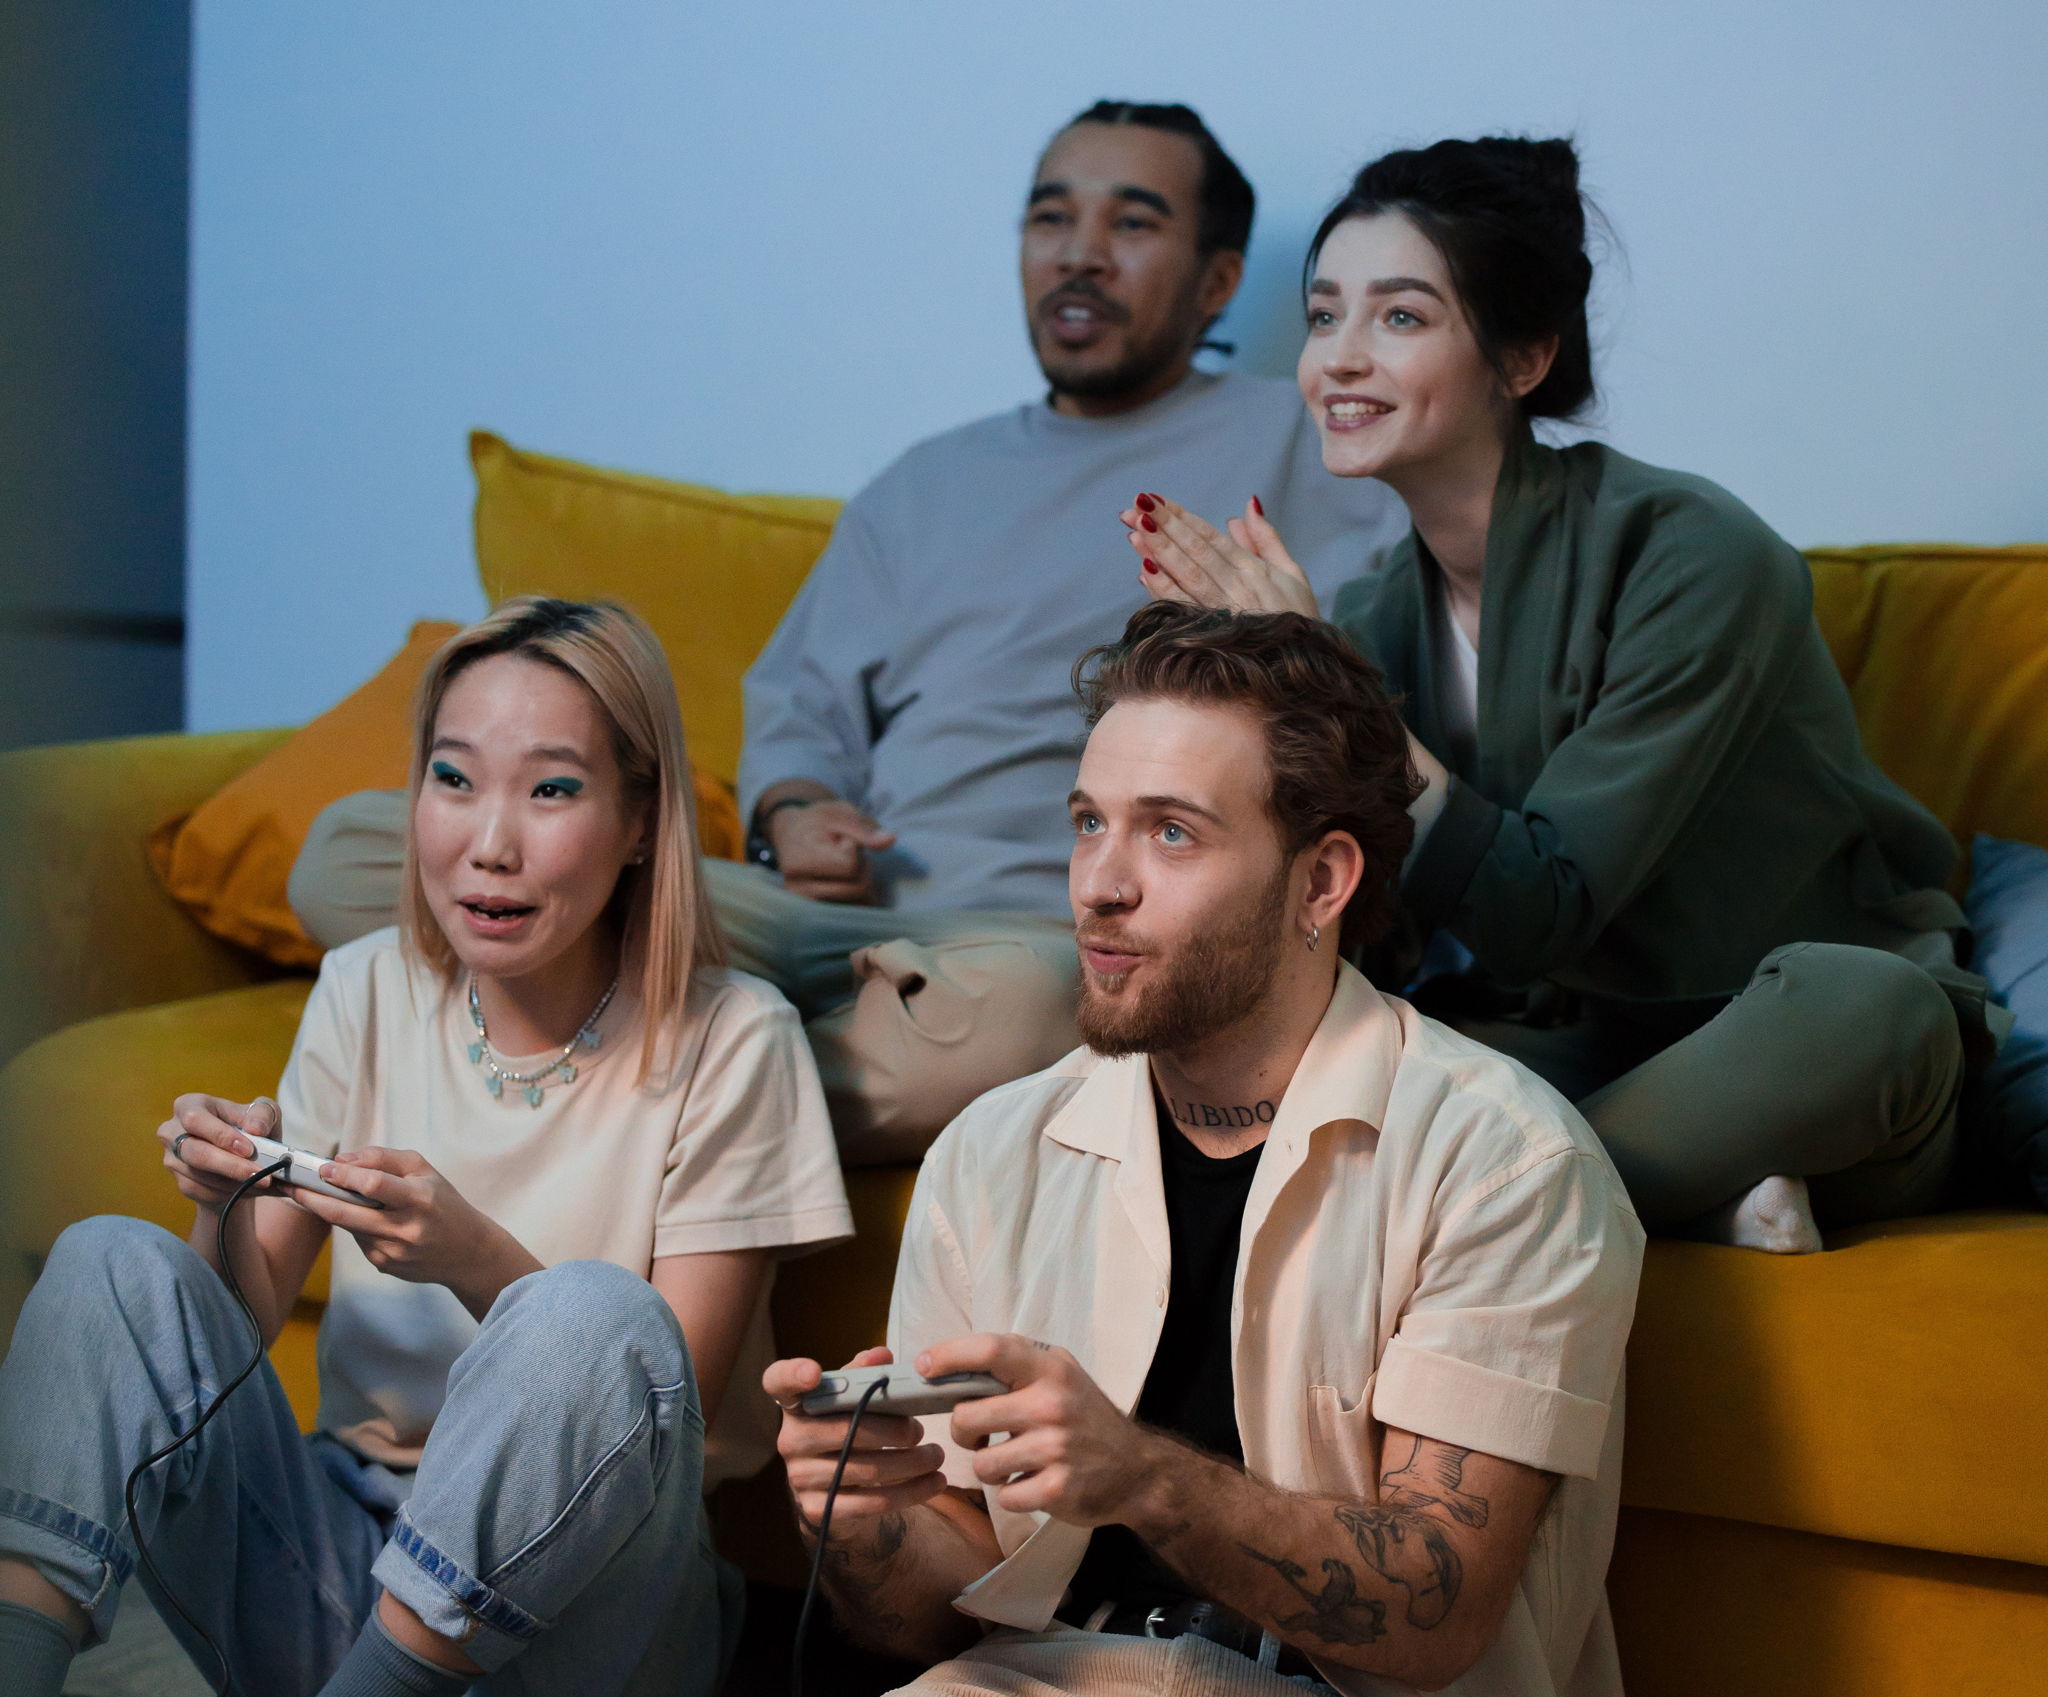 4 attractive multi ethnic friends, 2 men and 2 women, sitting and playing video games together laughing.